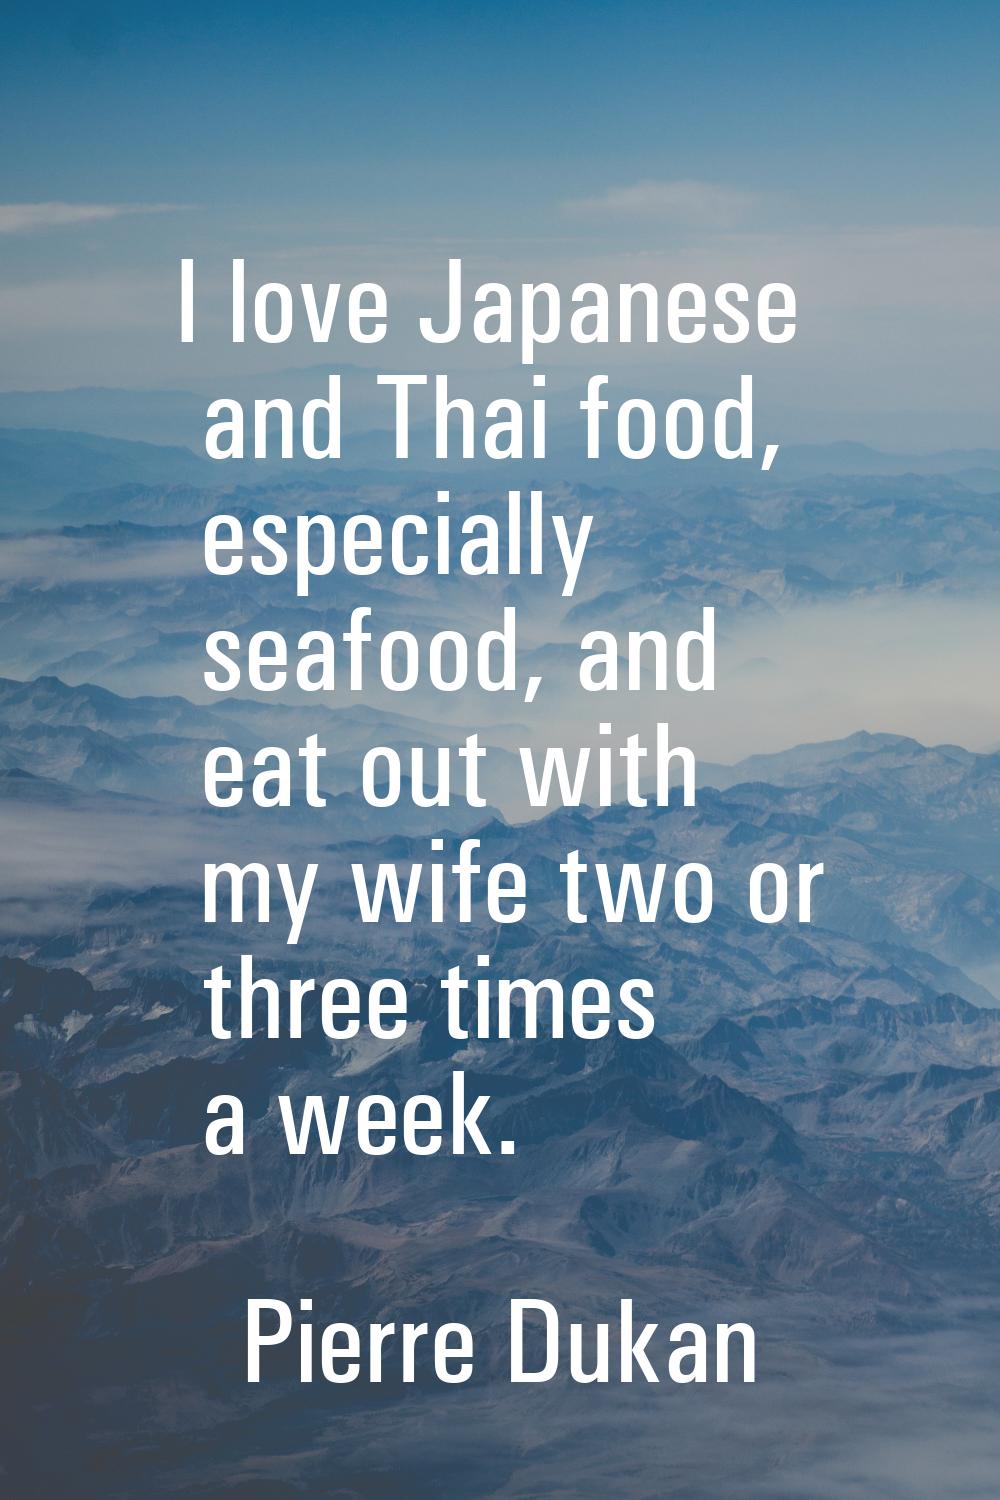 I love Japanese and Thai food, especially seafood, and eat out with my wife two or three times a we